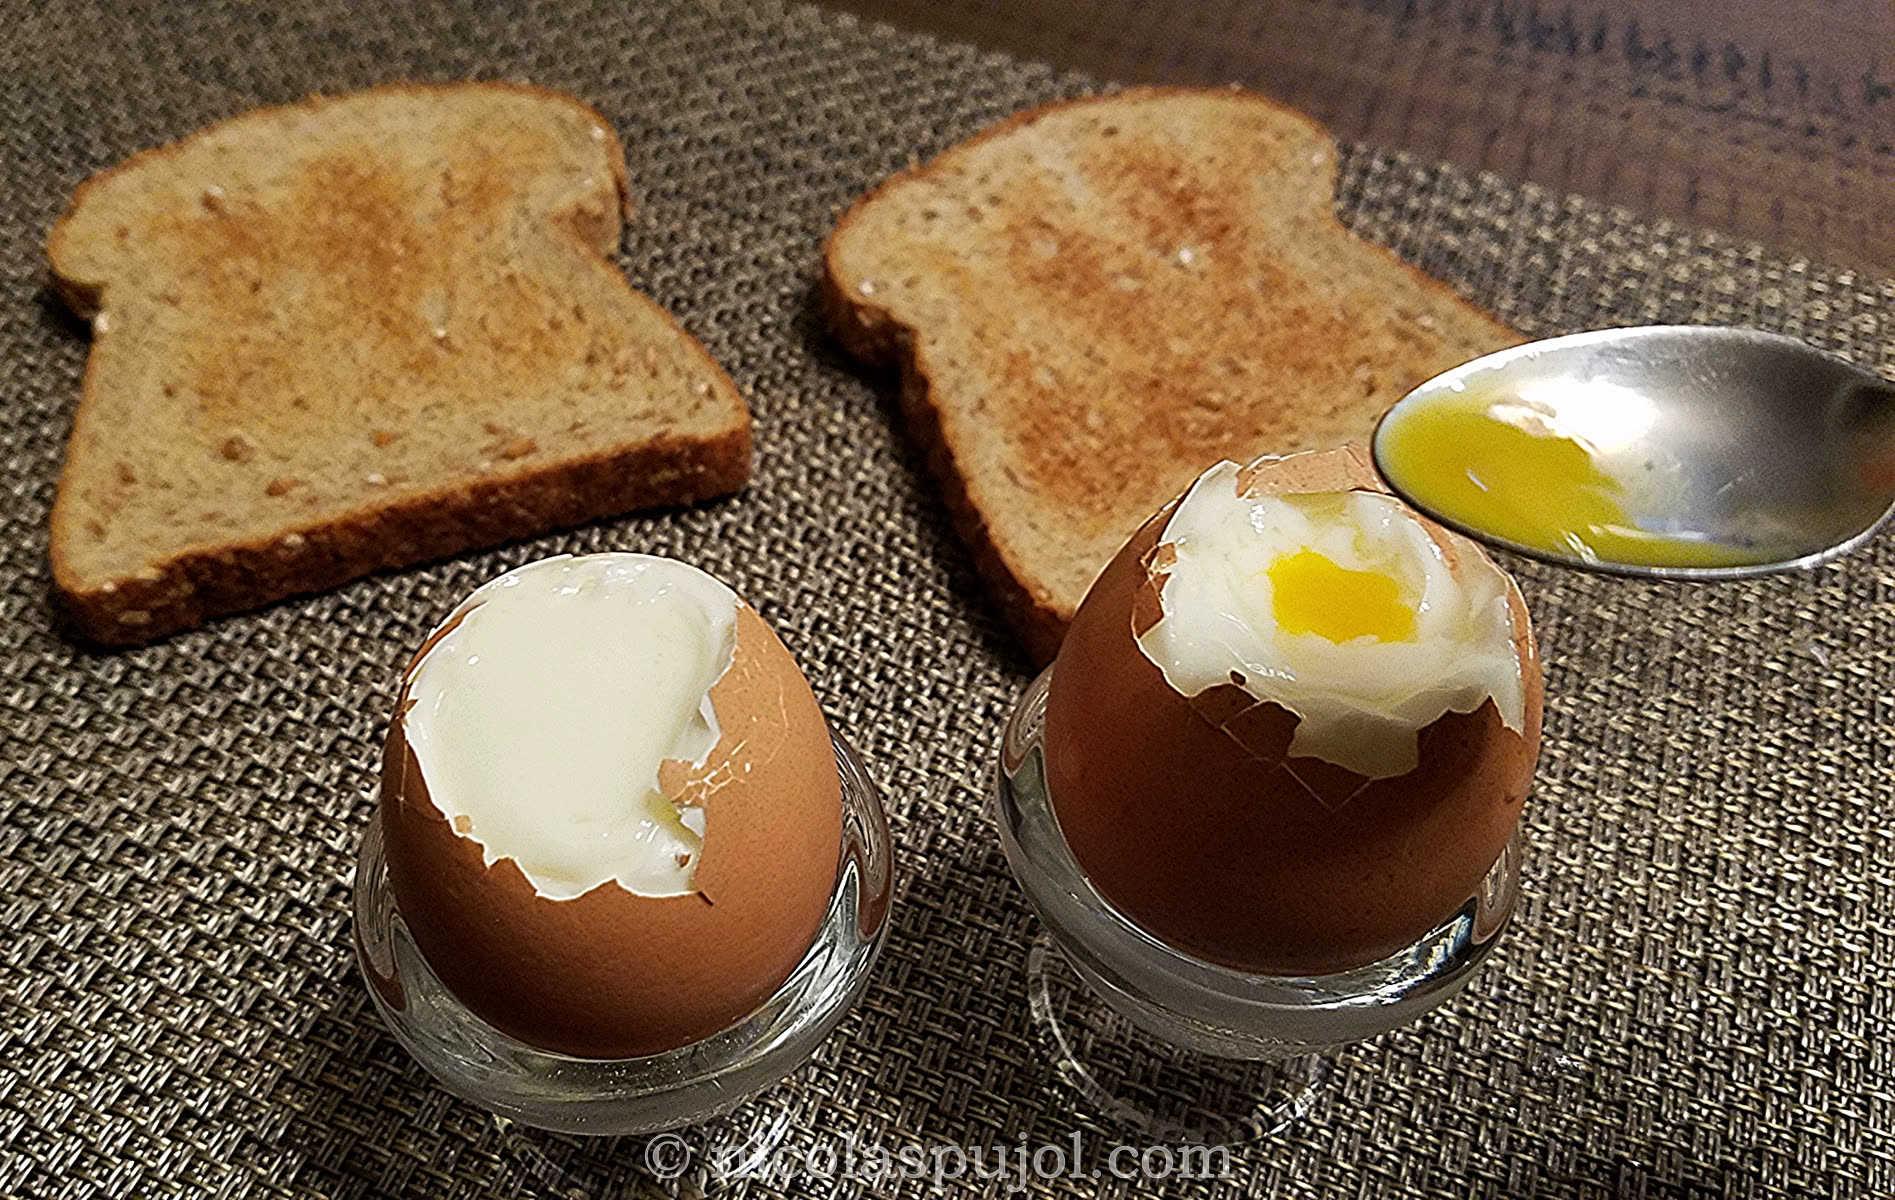 https://www.nicolaspujol.com/wp-content/uploads/2018/02/French-style-soft-boiled-eggs-on-the-shell.jpg